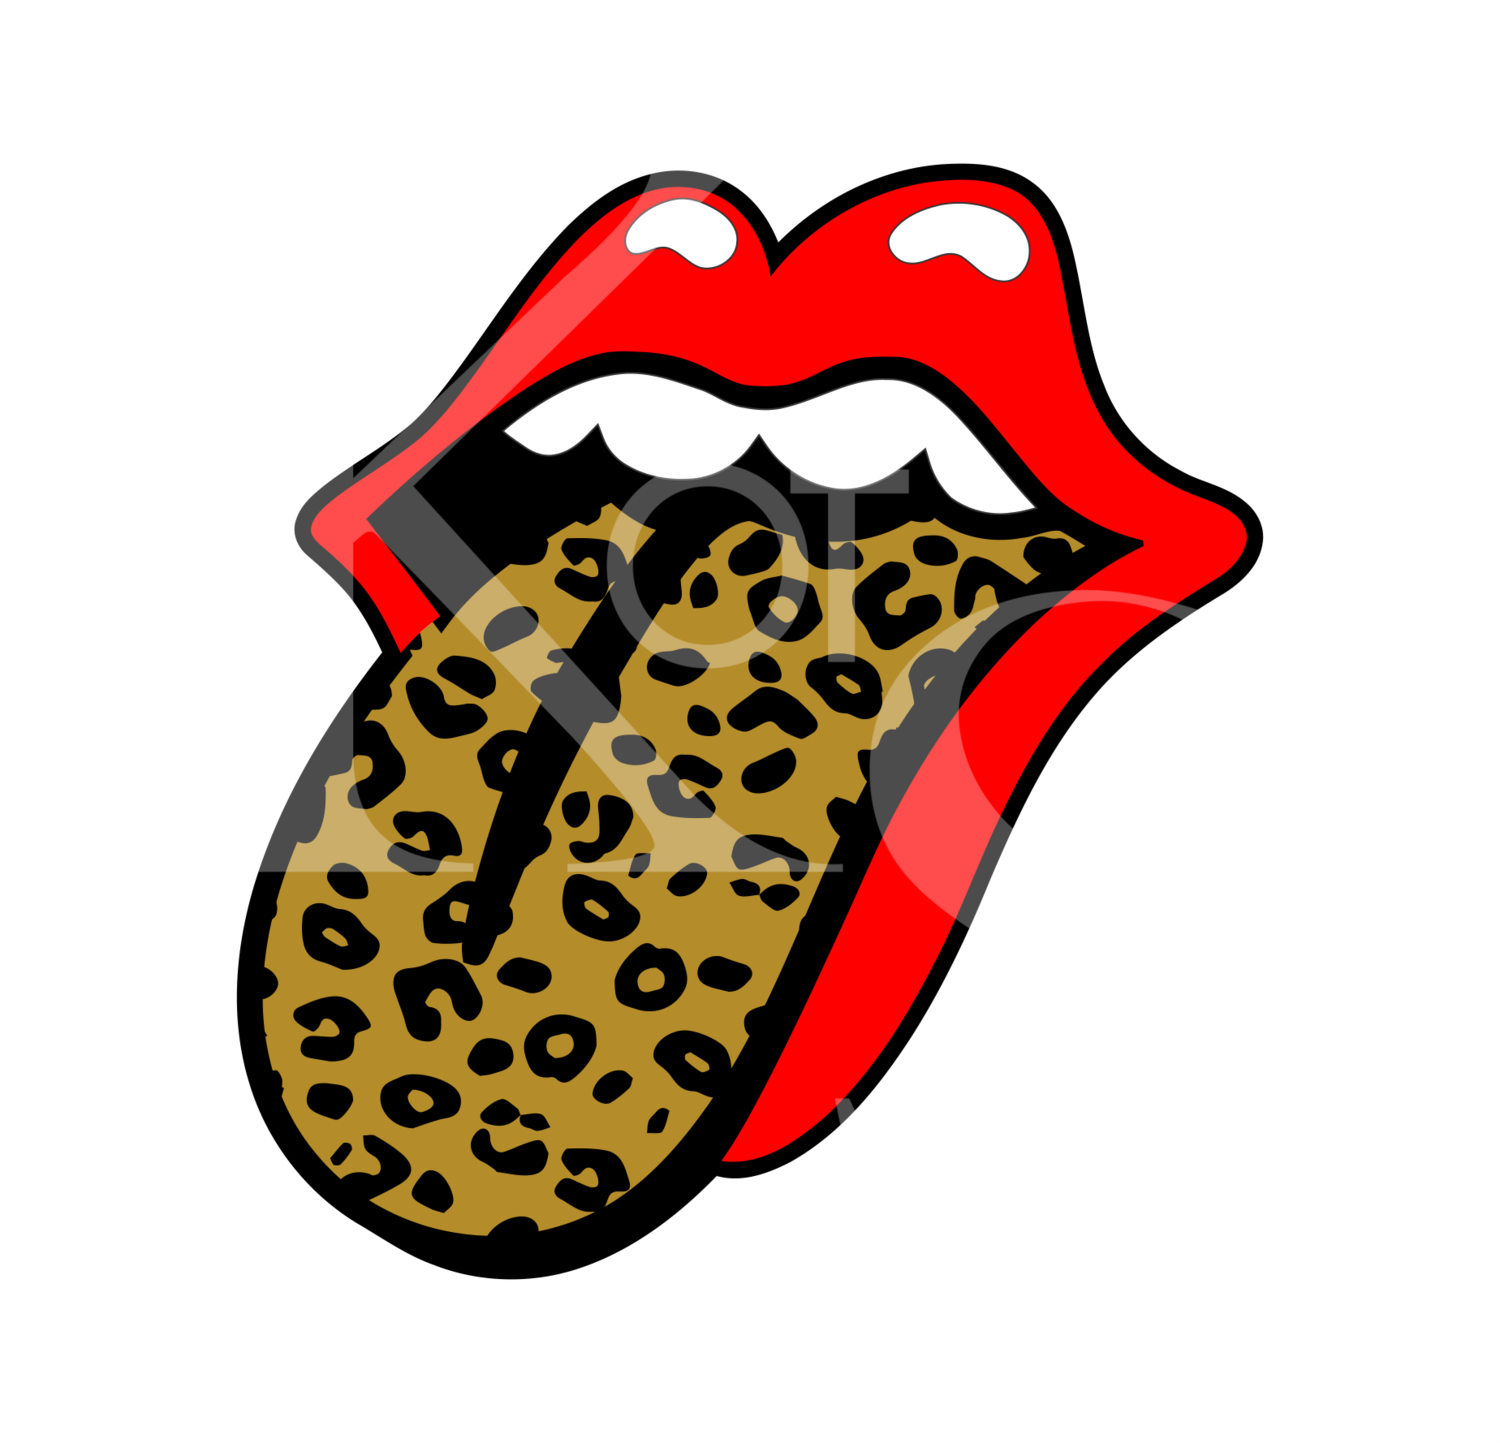 Luscious Lips With Leopard Tongue SVG, Red Lips svg, Rock Band T-shirt svg, Stones svg, Decorative svg, Cut File Cricut, Silhouette